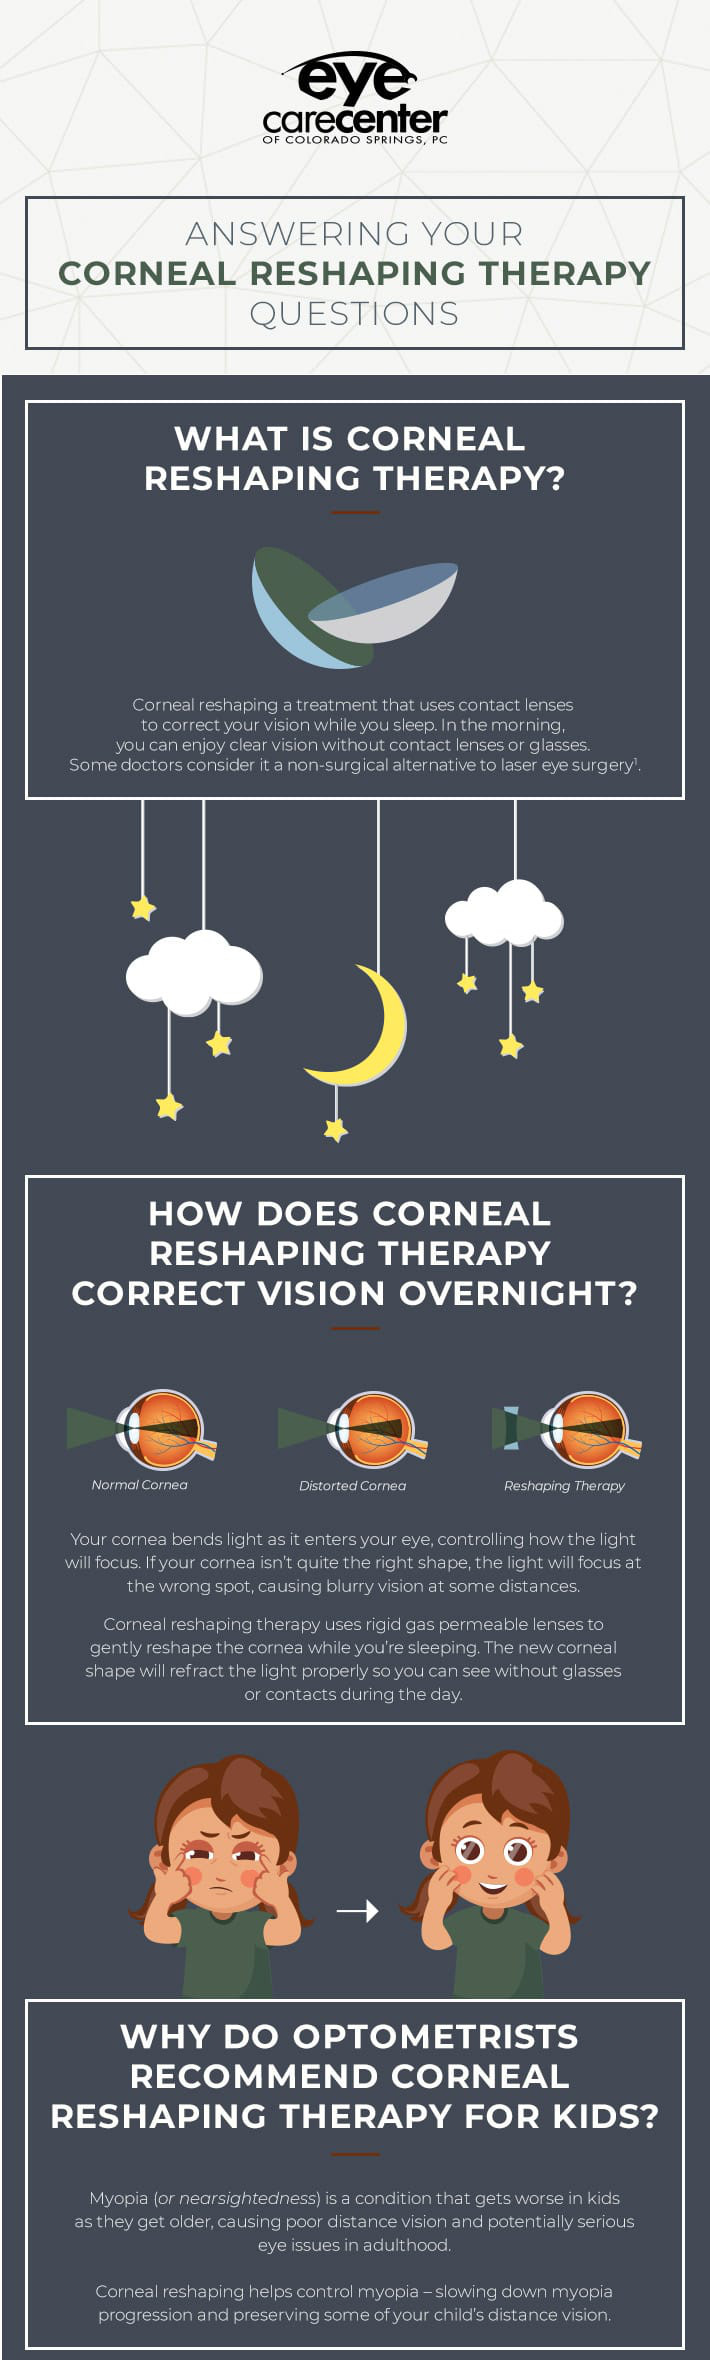 A long infographic answering questions about corneal reshaping therapy.